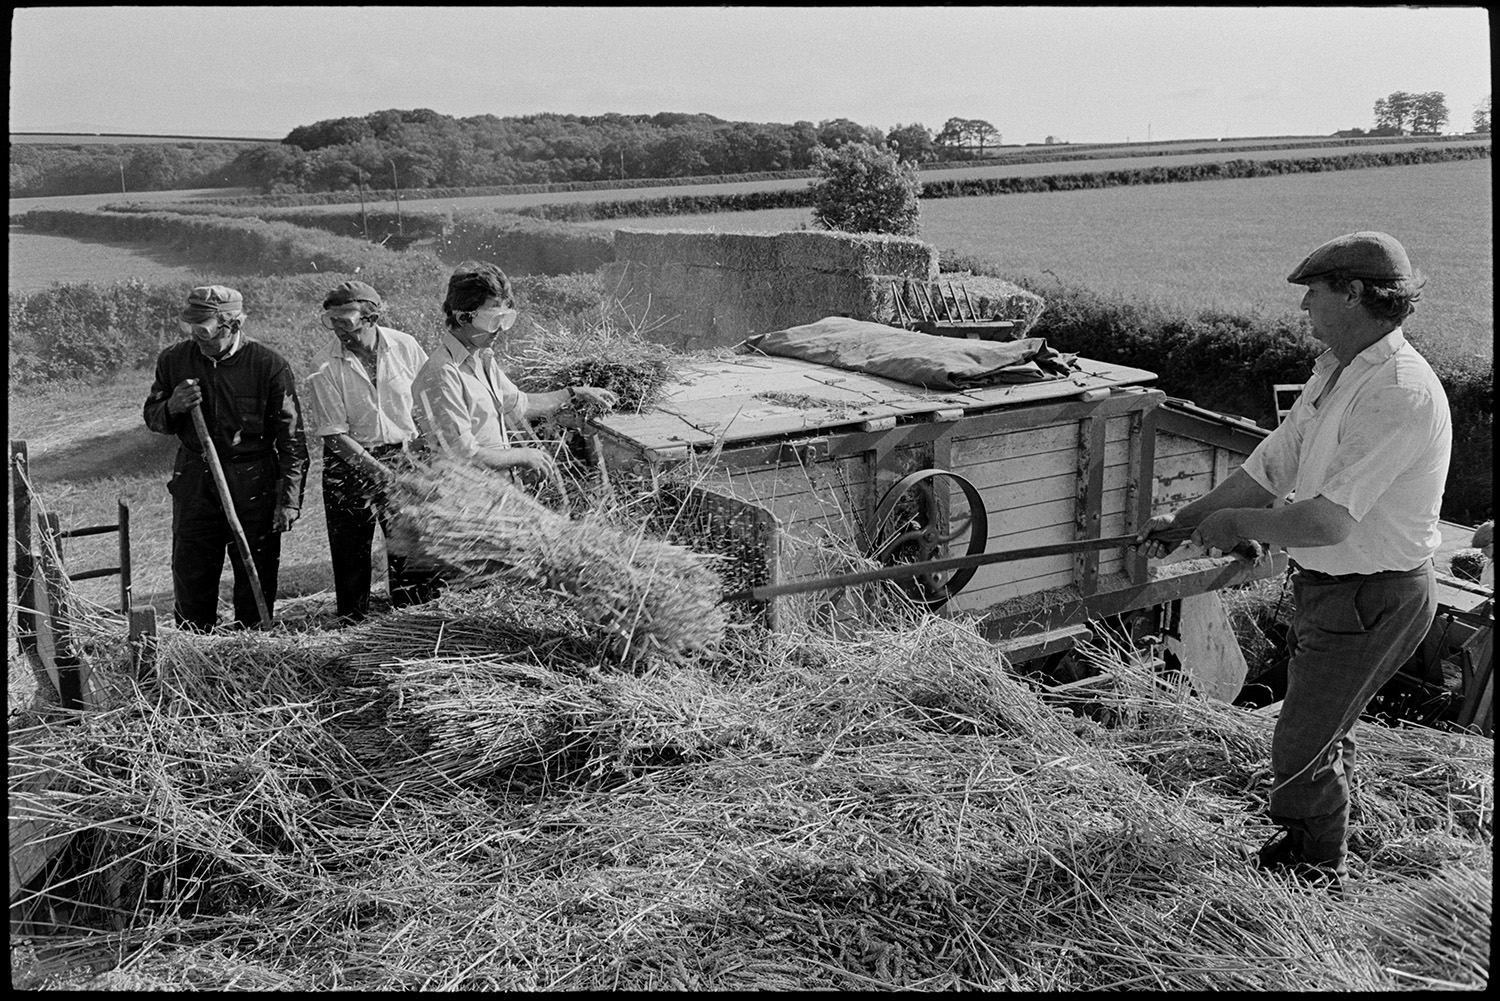 Reedcombing, men feeding wheat sheaves into machine from rick.
[Four men feeding wheat sheaves into a reed comber machine in a field at Westacott, Riddlecombe. A trailer loaded with bails of wheat stalks, hedgerows, fields and woodland is visible in the background. Three of the men are wearing goggles to protect their eyes.]